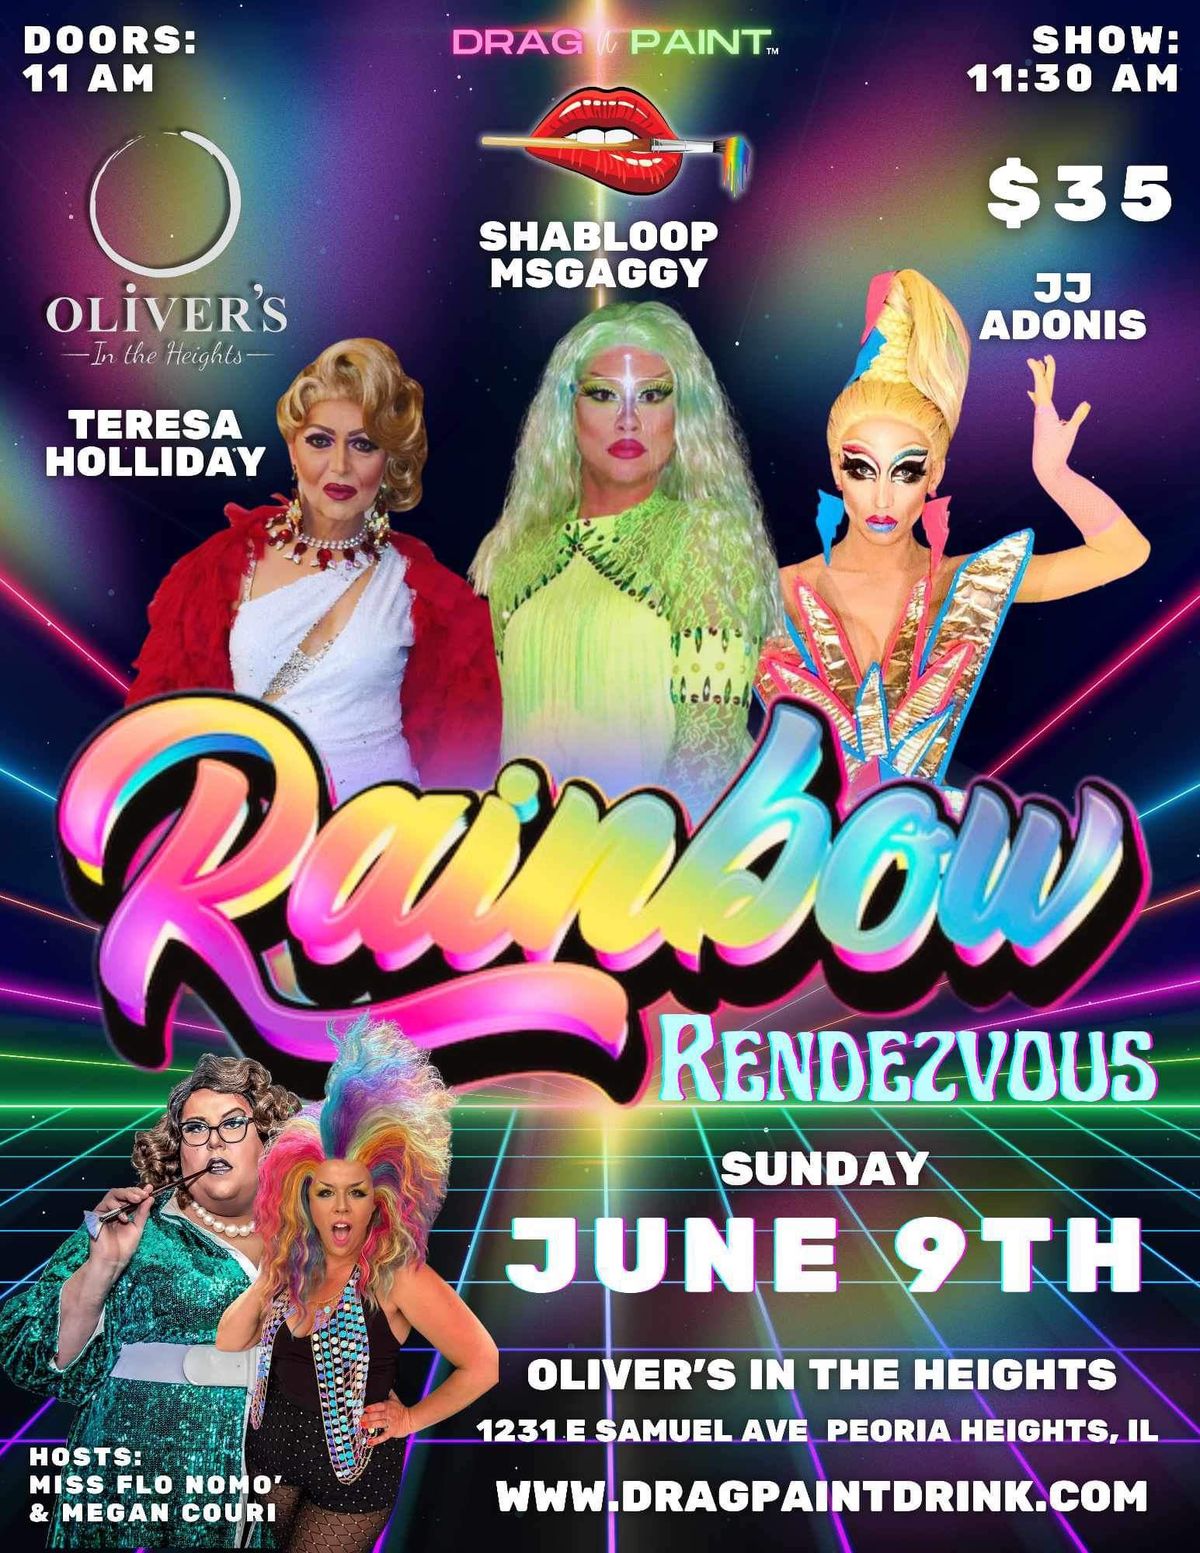 Drag N' Paint- Rainbow Rendezvous at Oliver's in the Heights